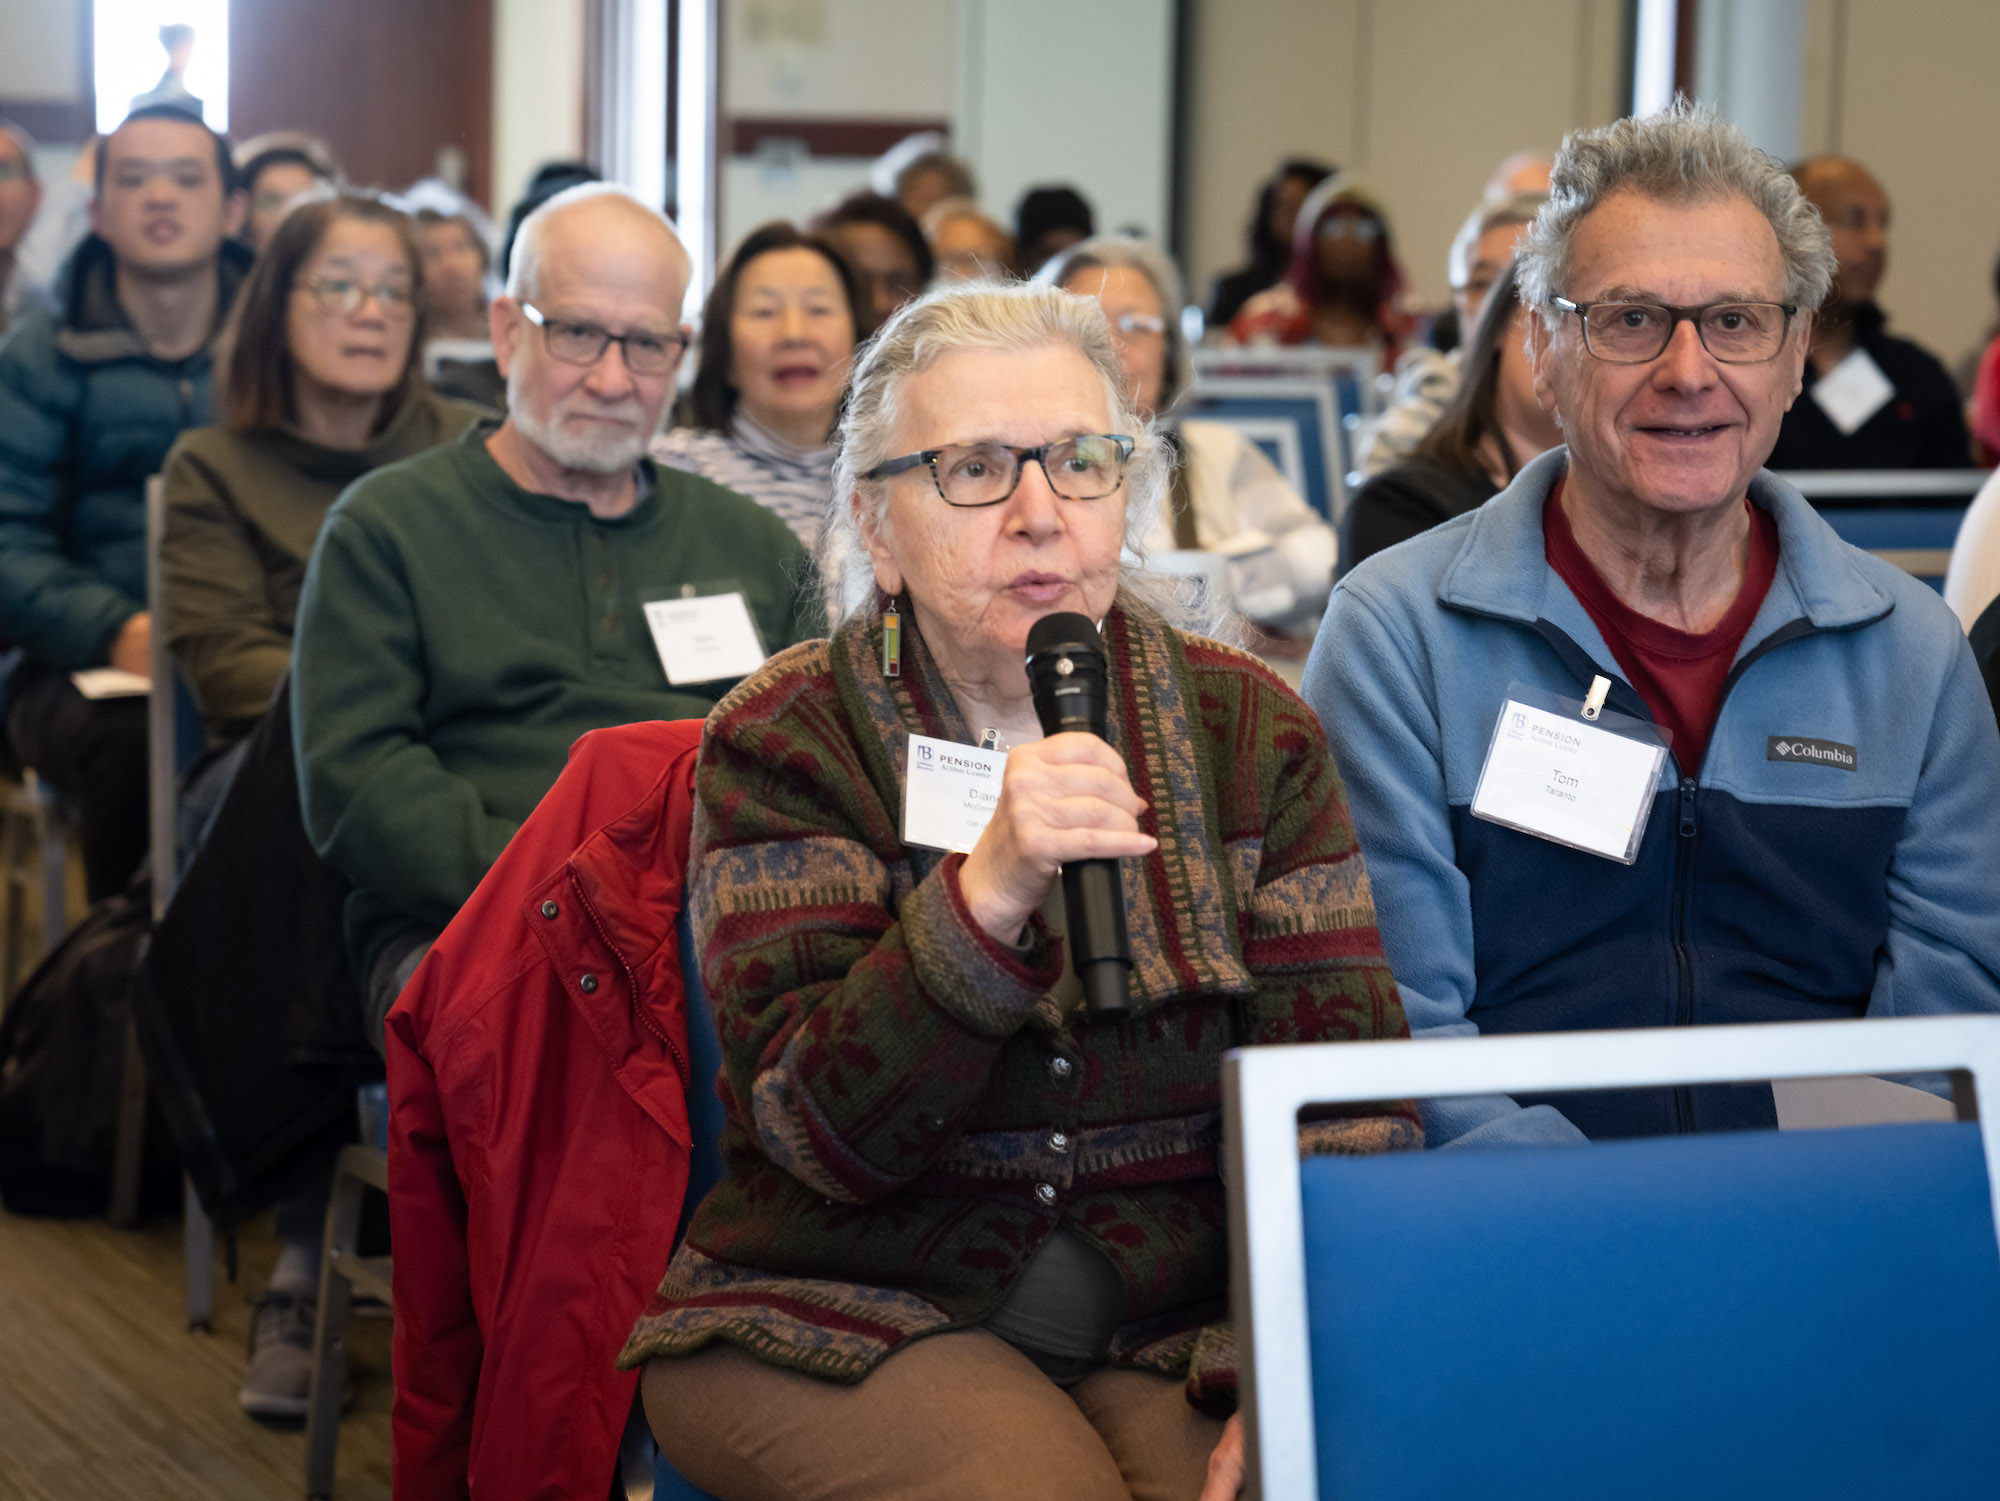 Elderly person with microphone at Fraud Prevention seminar